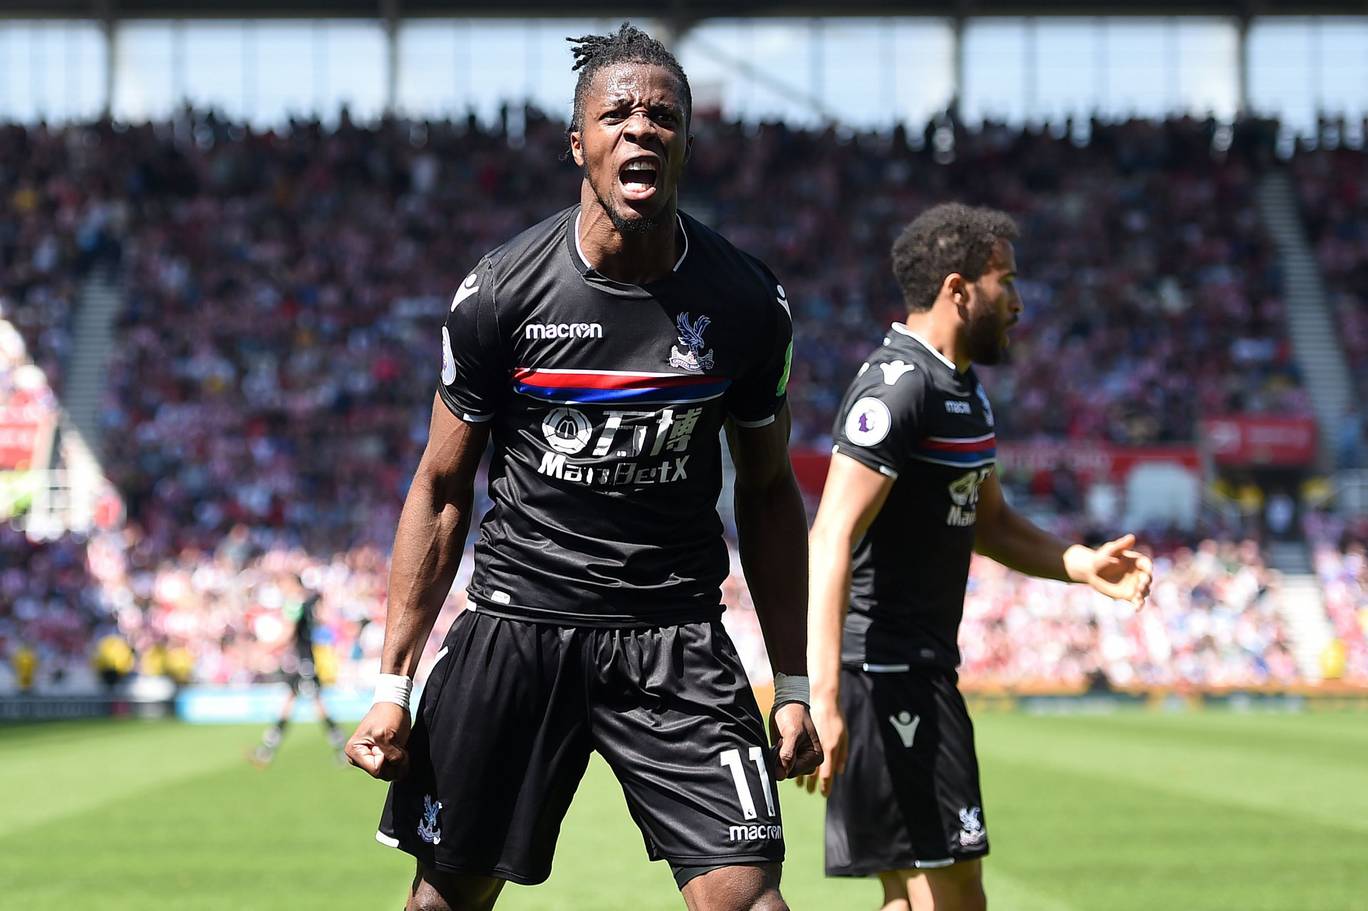 Crystal Palace forward Wilfried Zaha celebrates after scoring. (Getty Images)